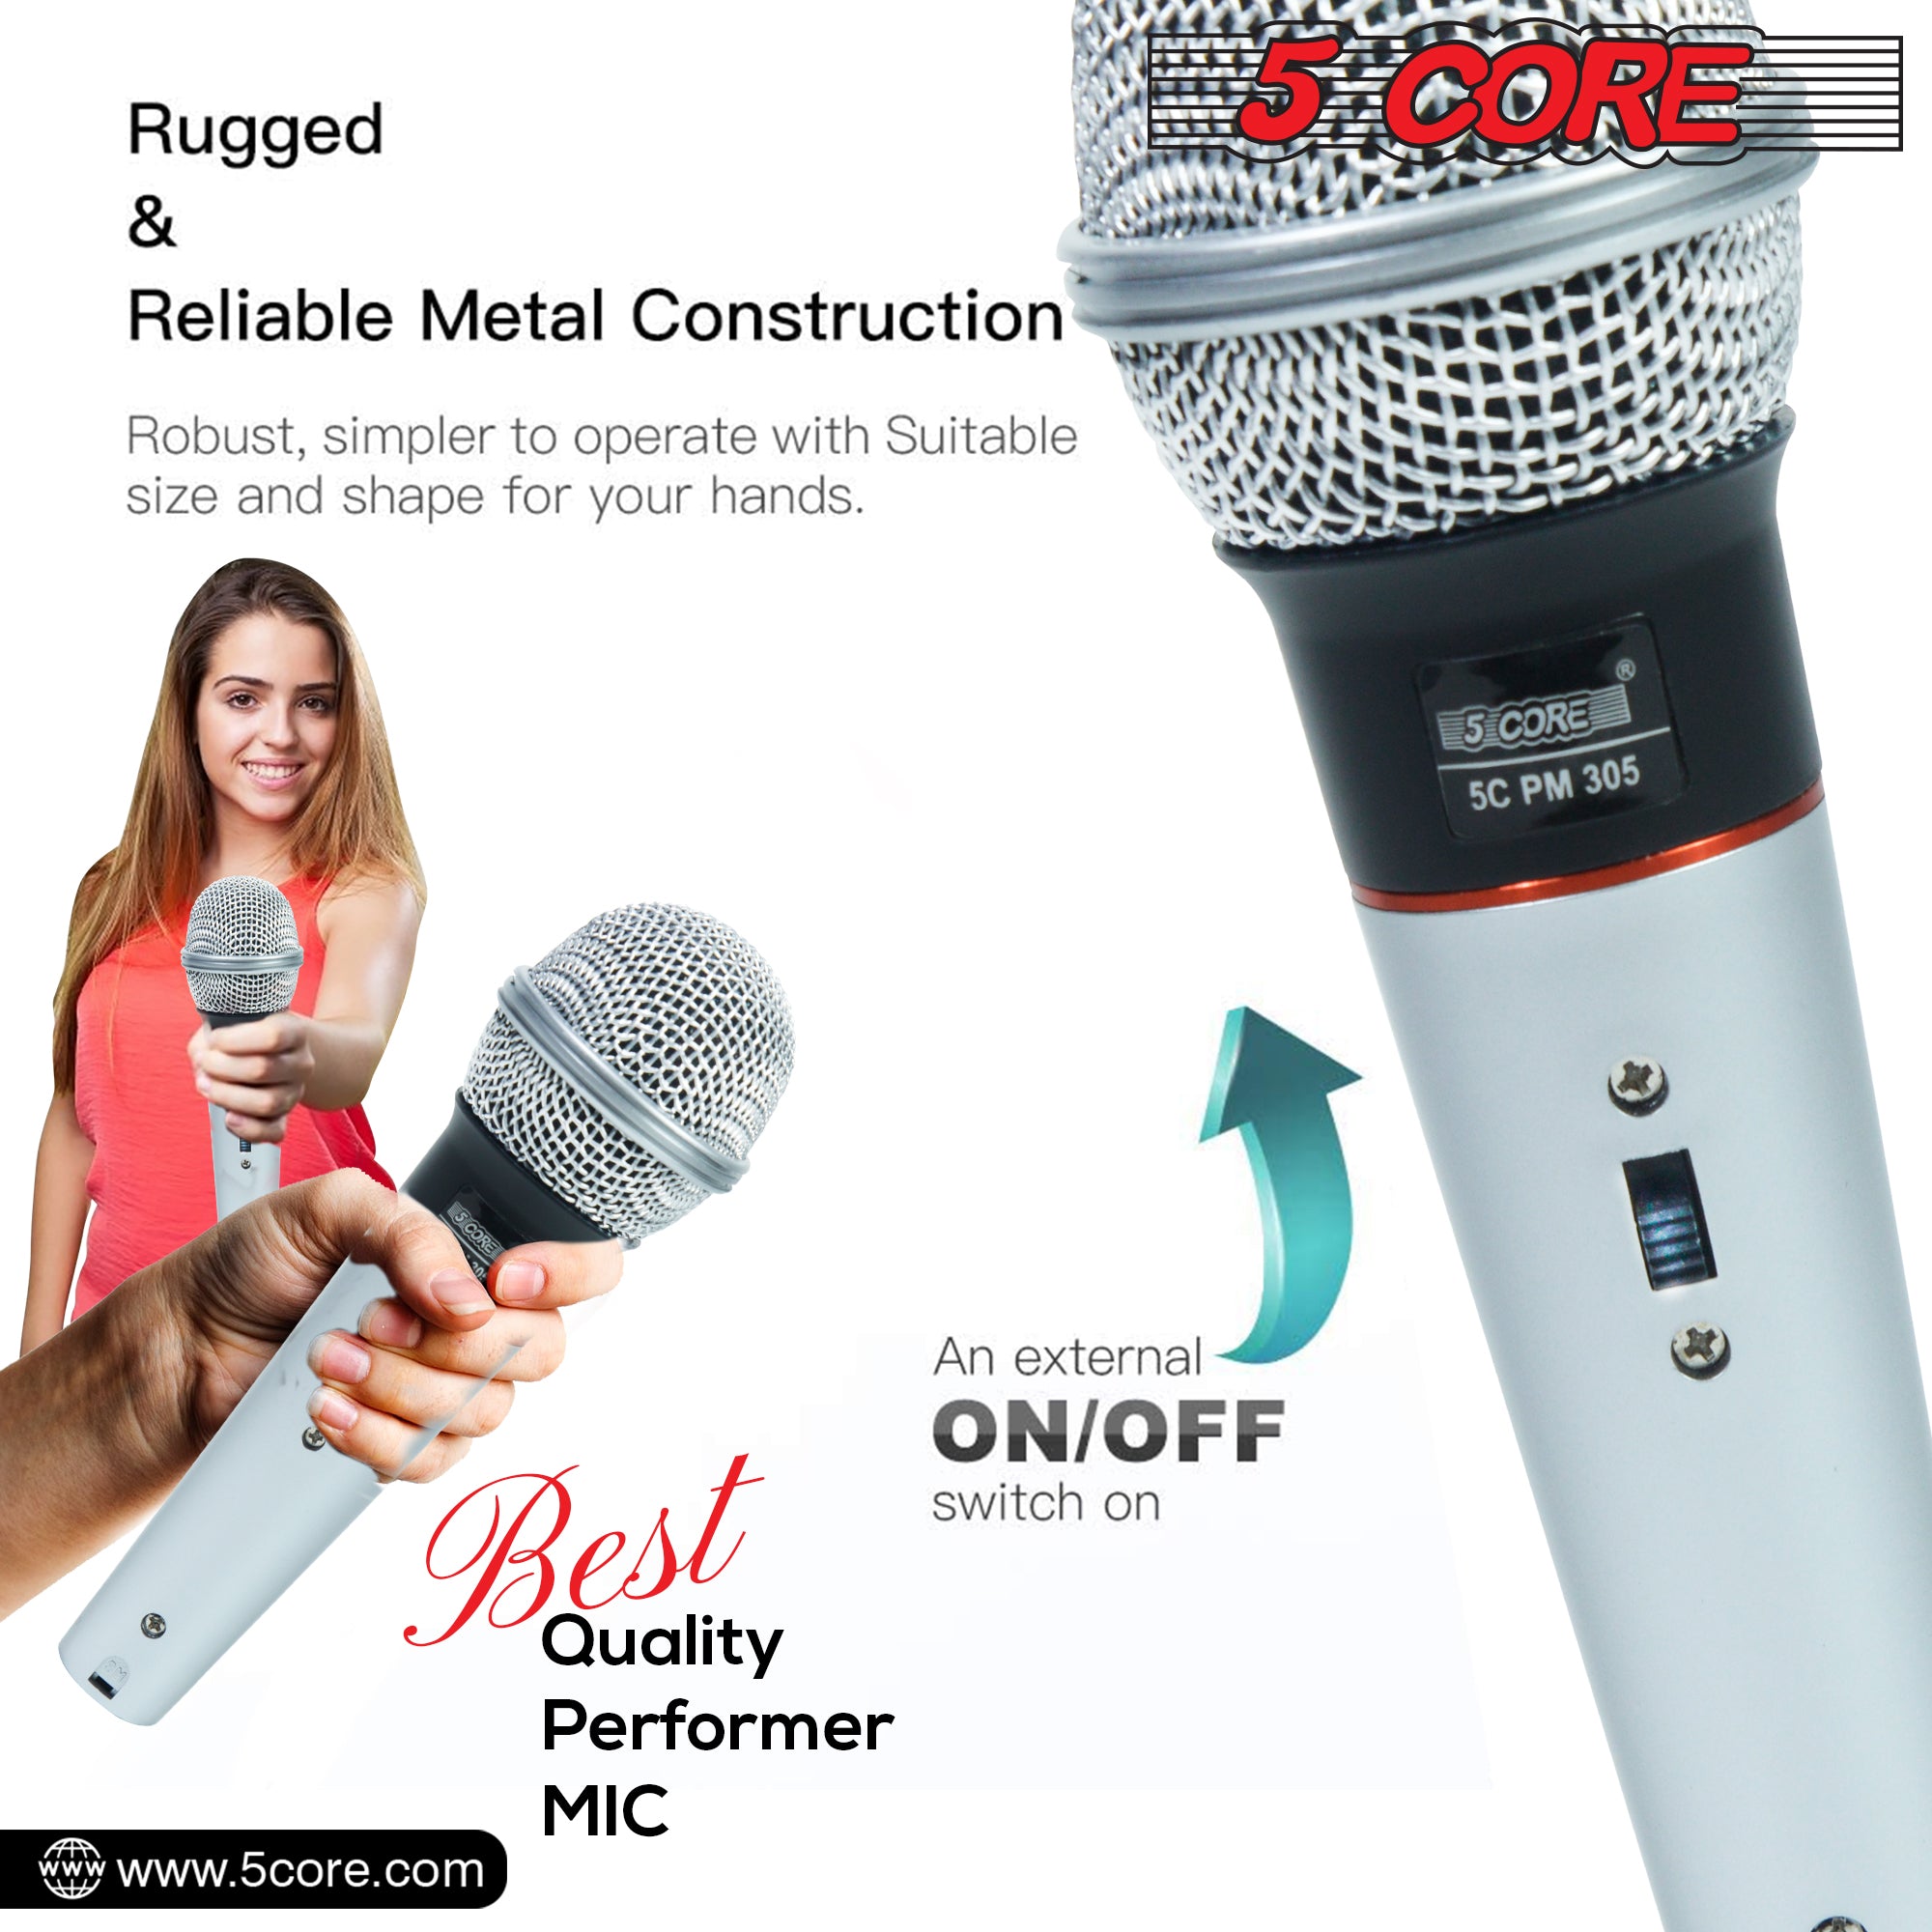 5 Core Microphone Karaoke XLR Wired Mic Professional Studio Microfonos w ON/OFF Switch Pop Filter Cardioid Unidirectional Pickup Handheld -PM 305